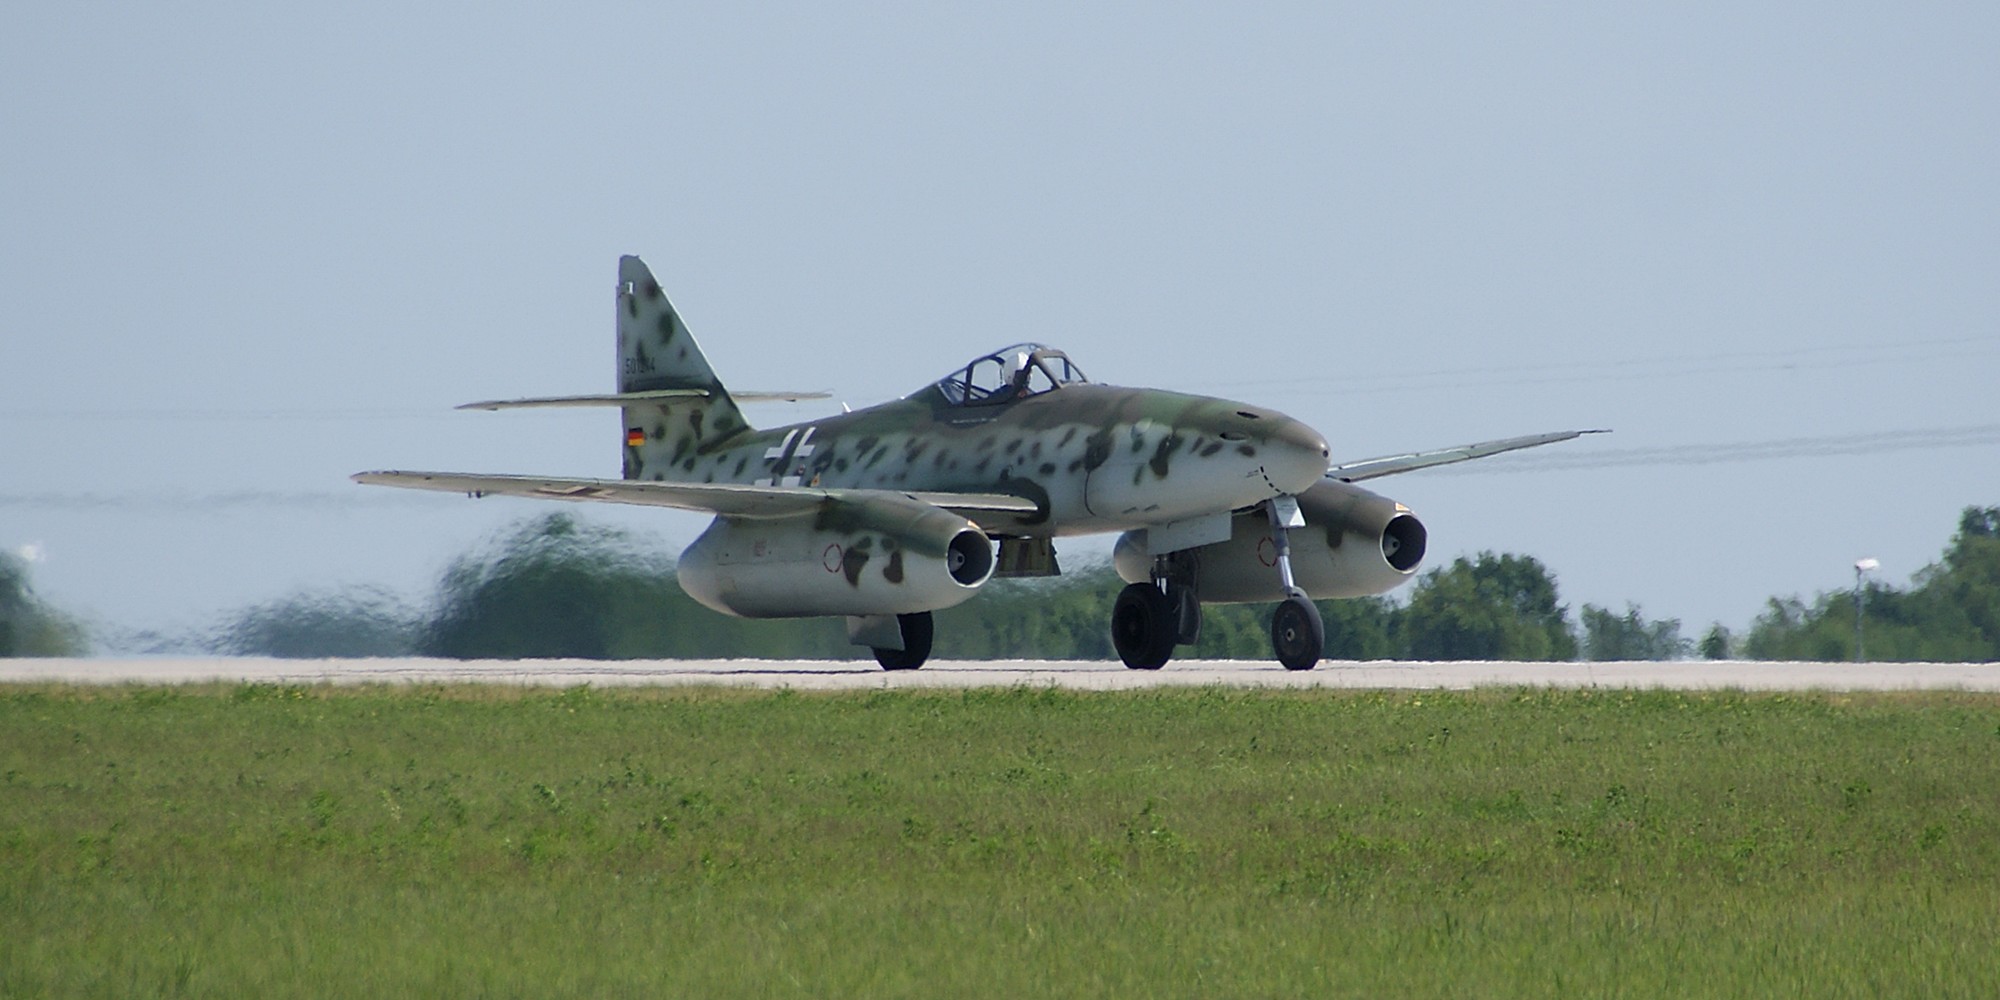 Me-262 was the first operational jet fighter